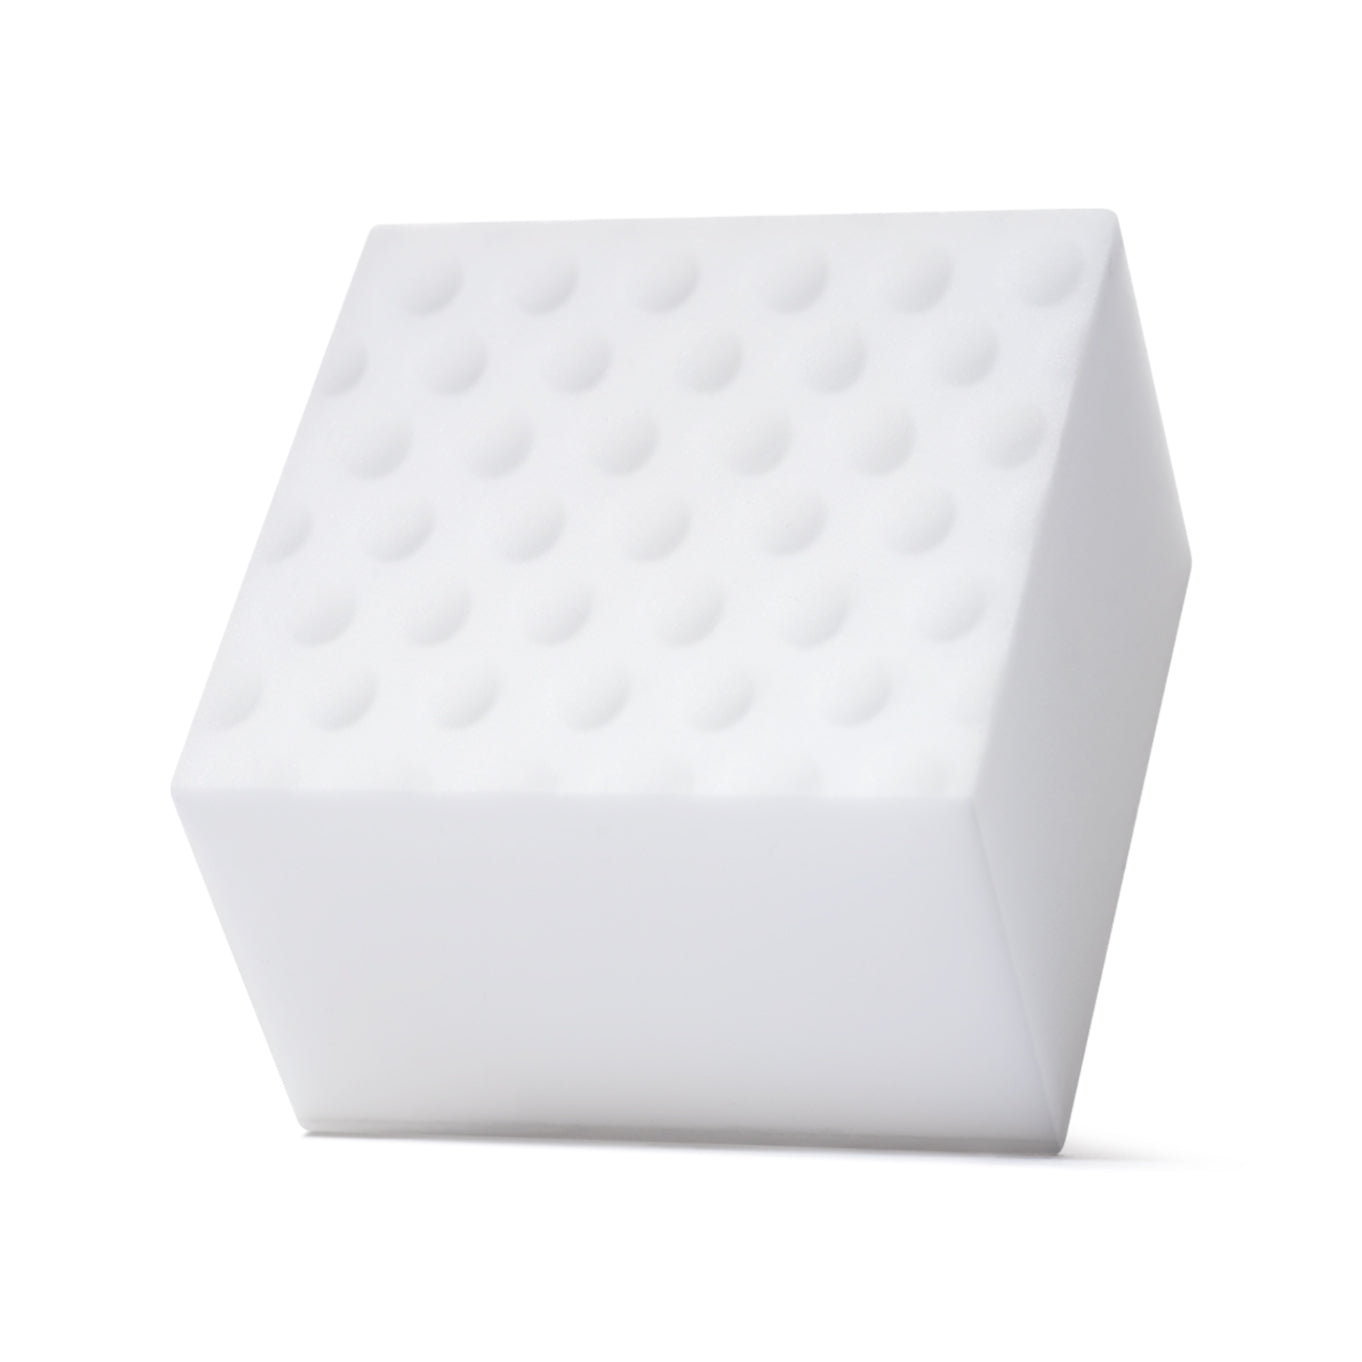 A white shoe cleaning sponge with textured bumps sitting on a white surface.